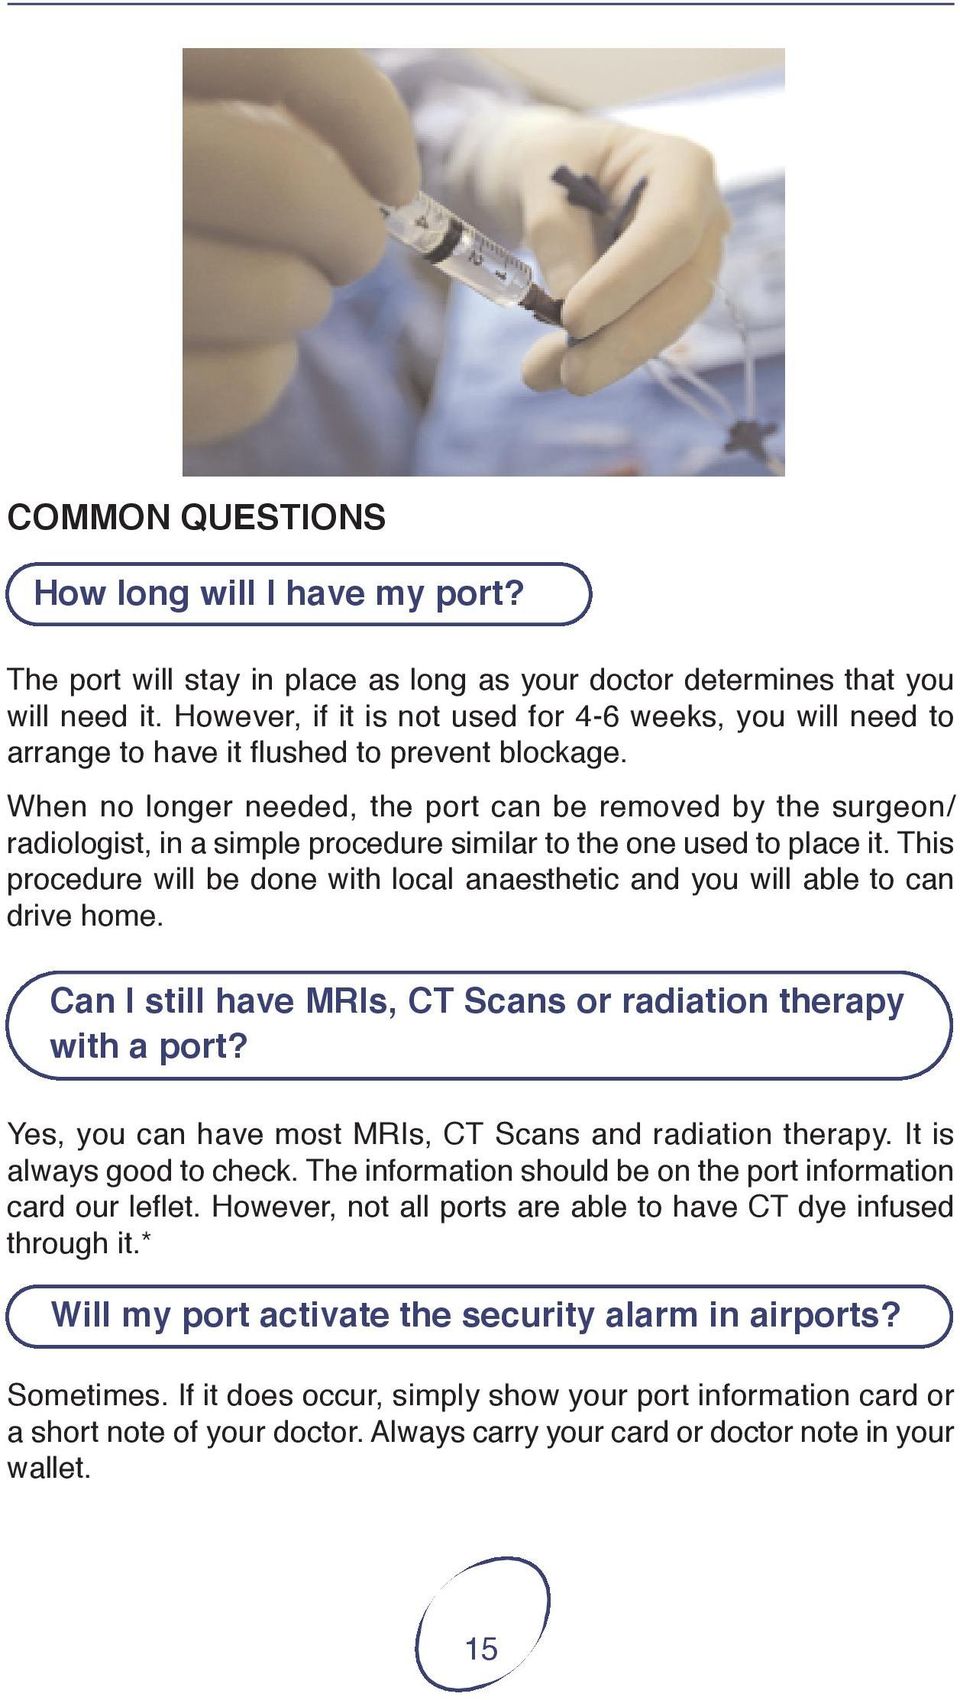 When no longer needed, the port can be removed by the surgeon/ radiologist, in a simple procedure similar to the one used to place it.